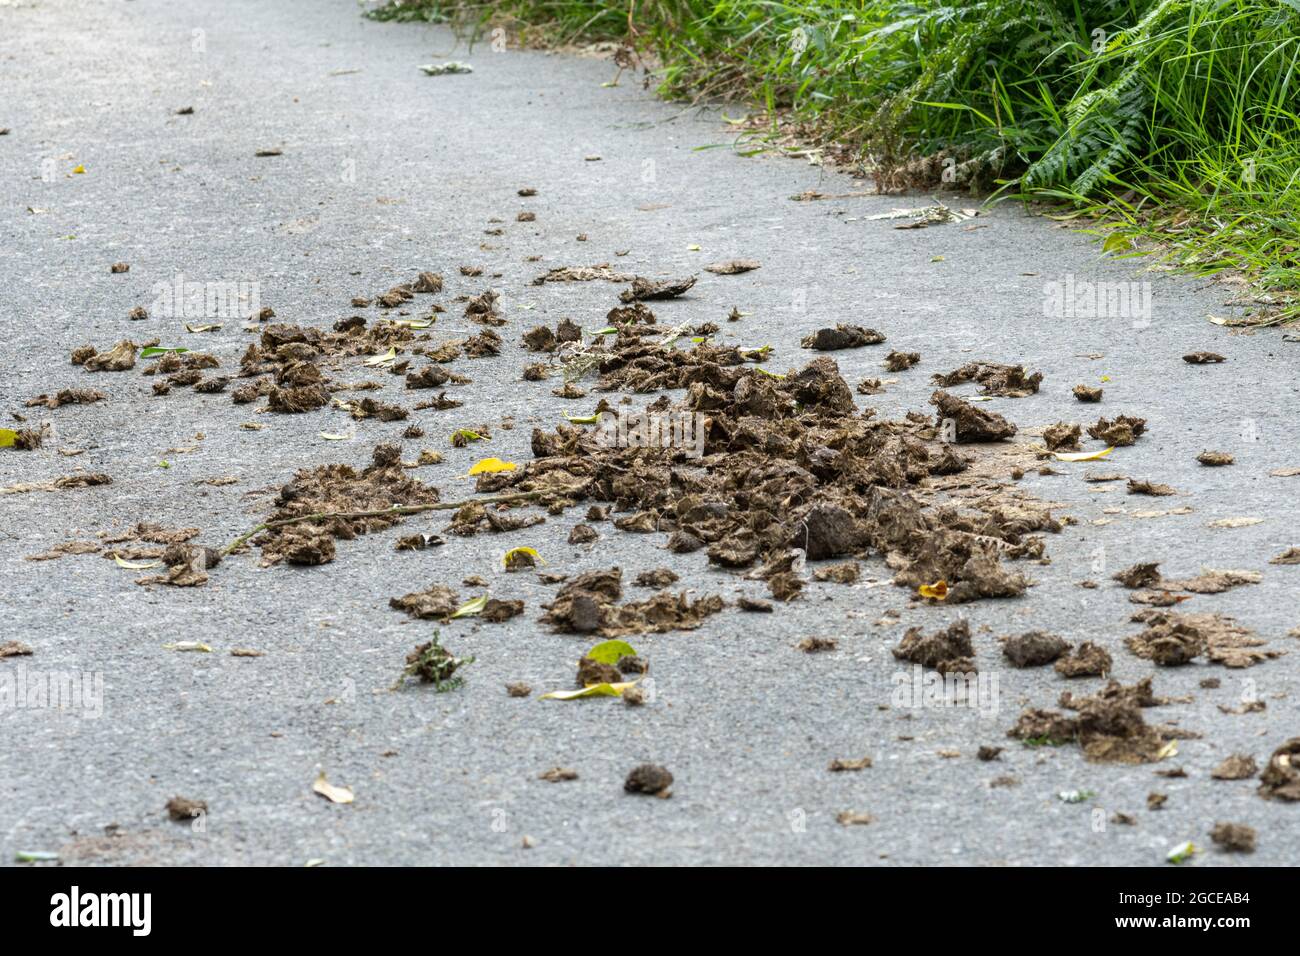 Horse manure or droppings on a country road, UK Stock Photo